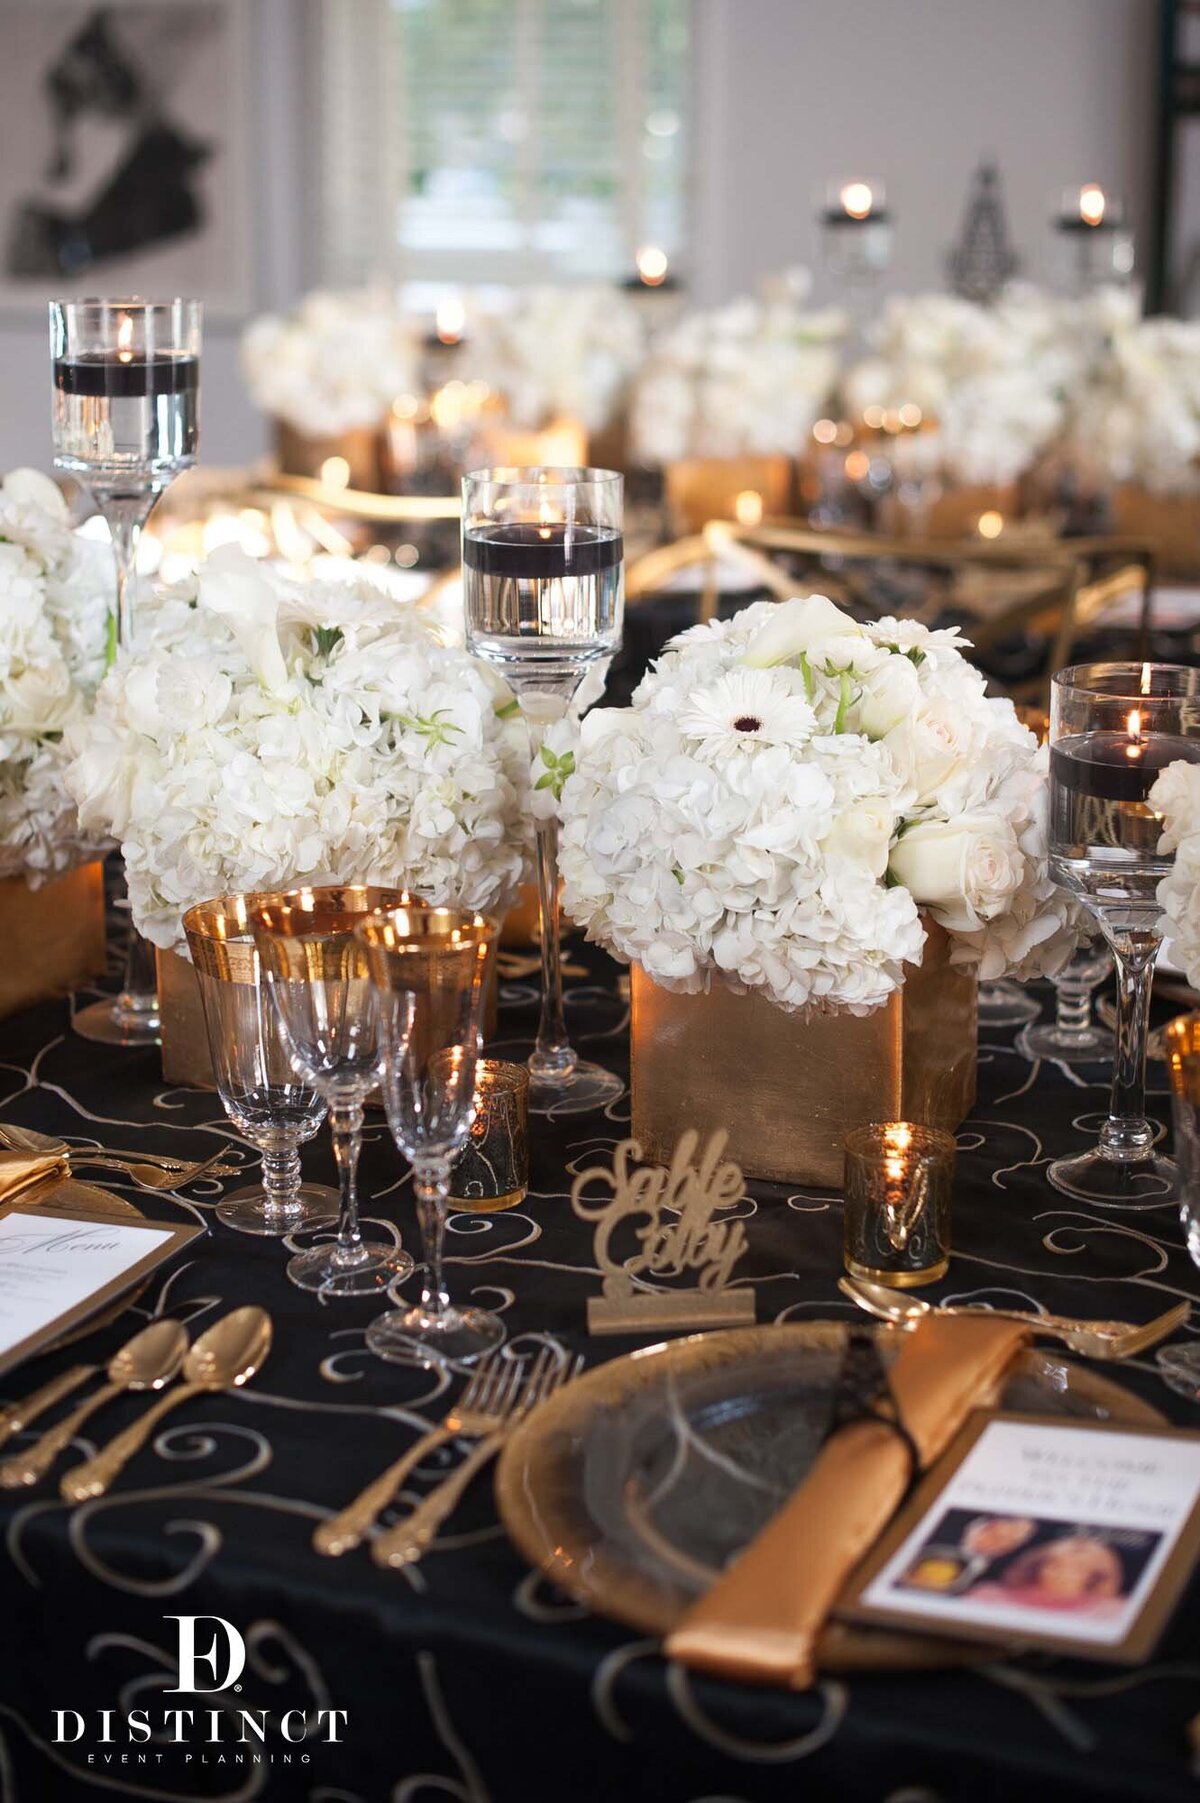 Distinct Event Planning & Dynasty Themed Dinner Party (7)